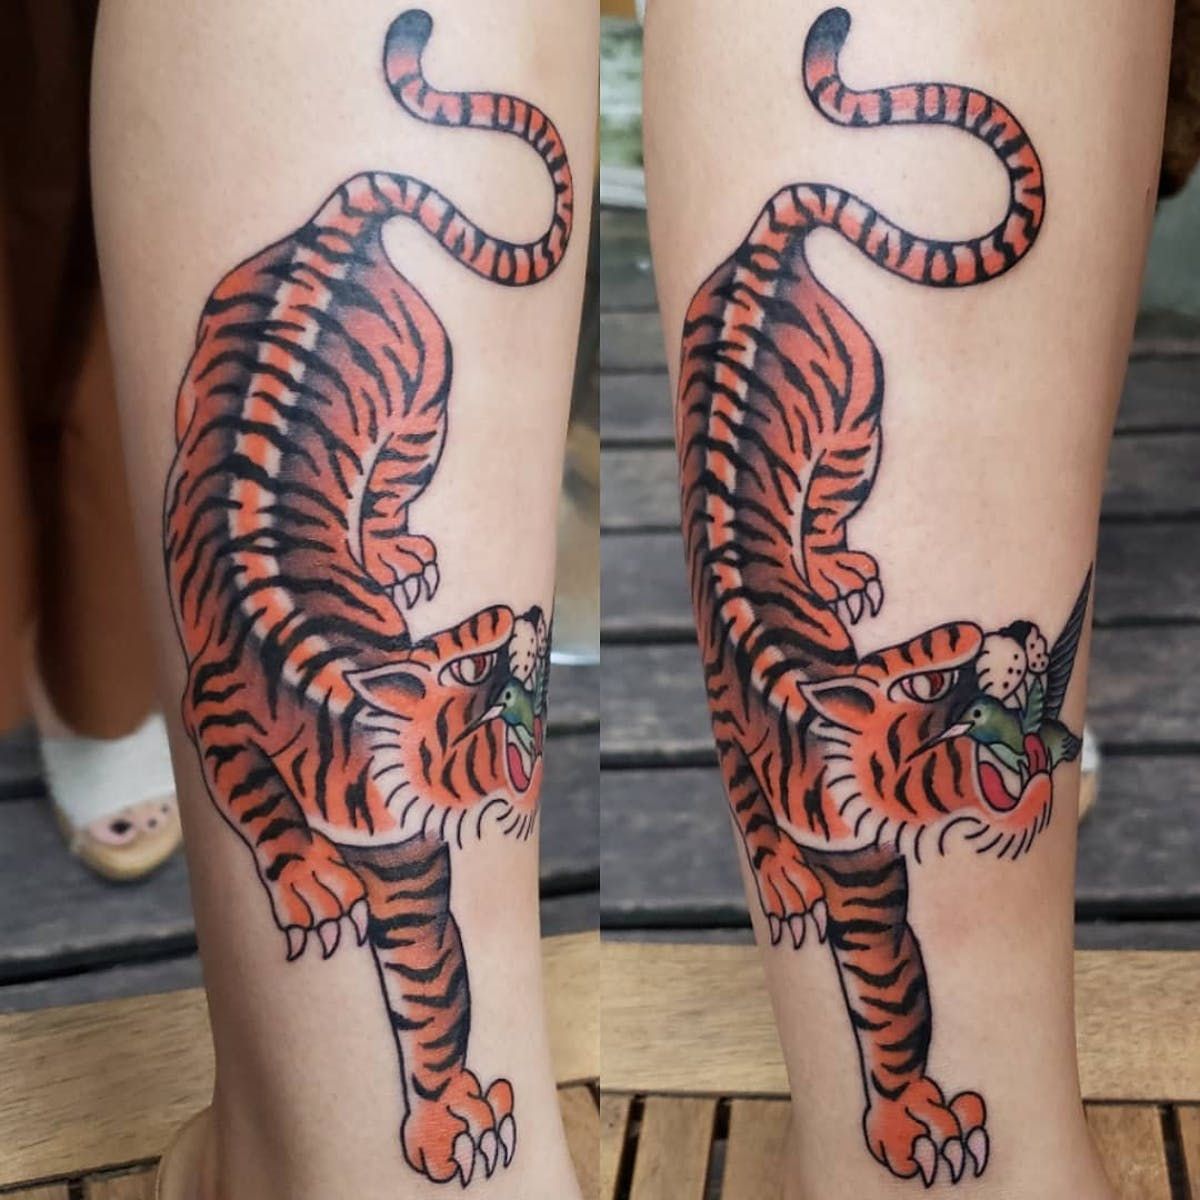 Gotta love this simple tiger tattoo I did on my client! Wish you an awesome  day with this tattoo design 🖤 Book open - check out my bi... | Instagram